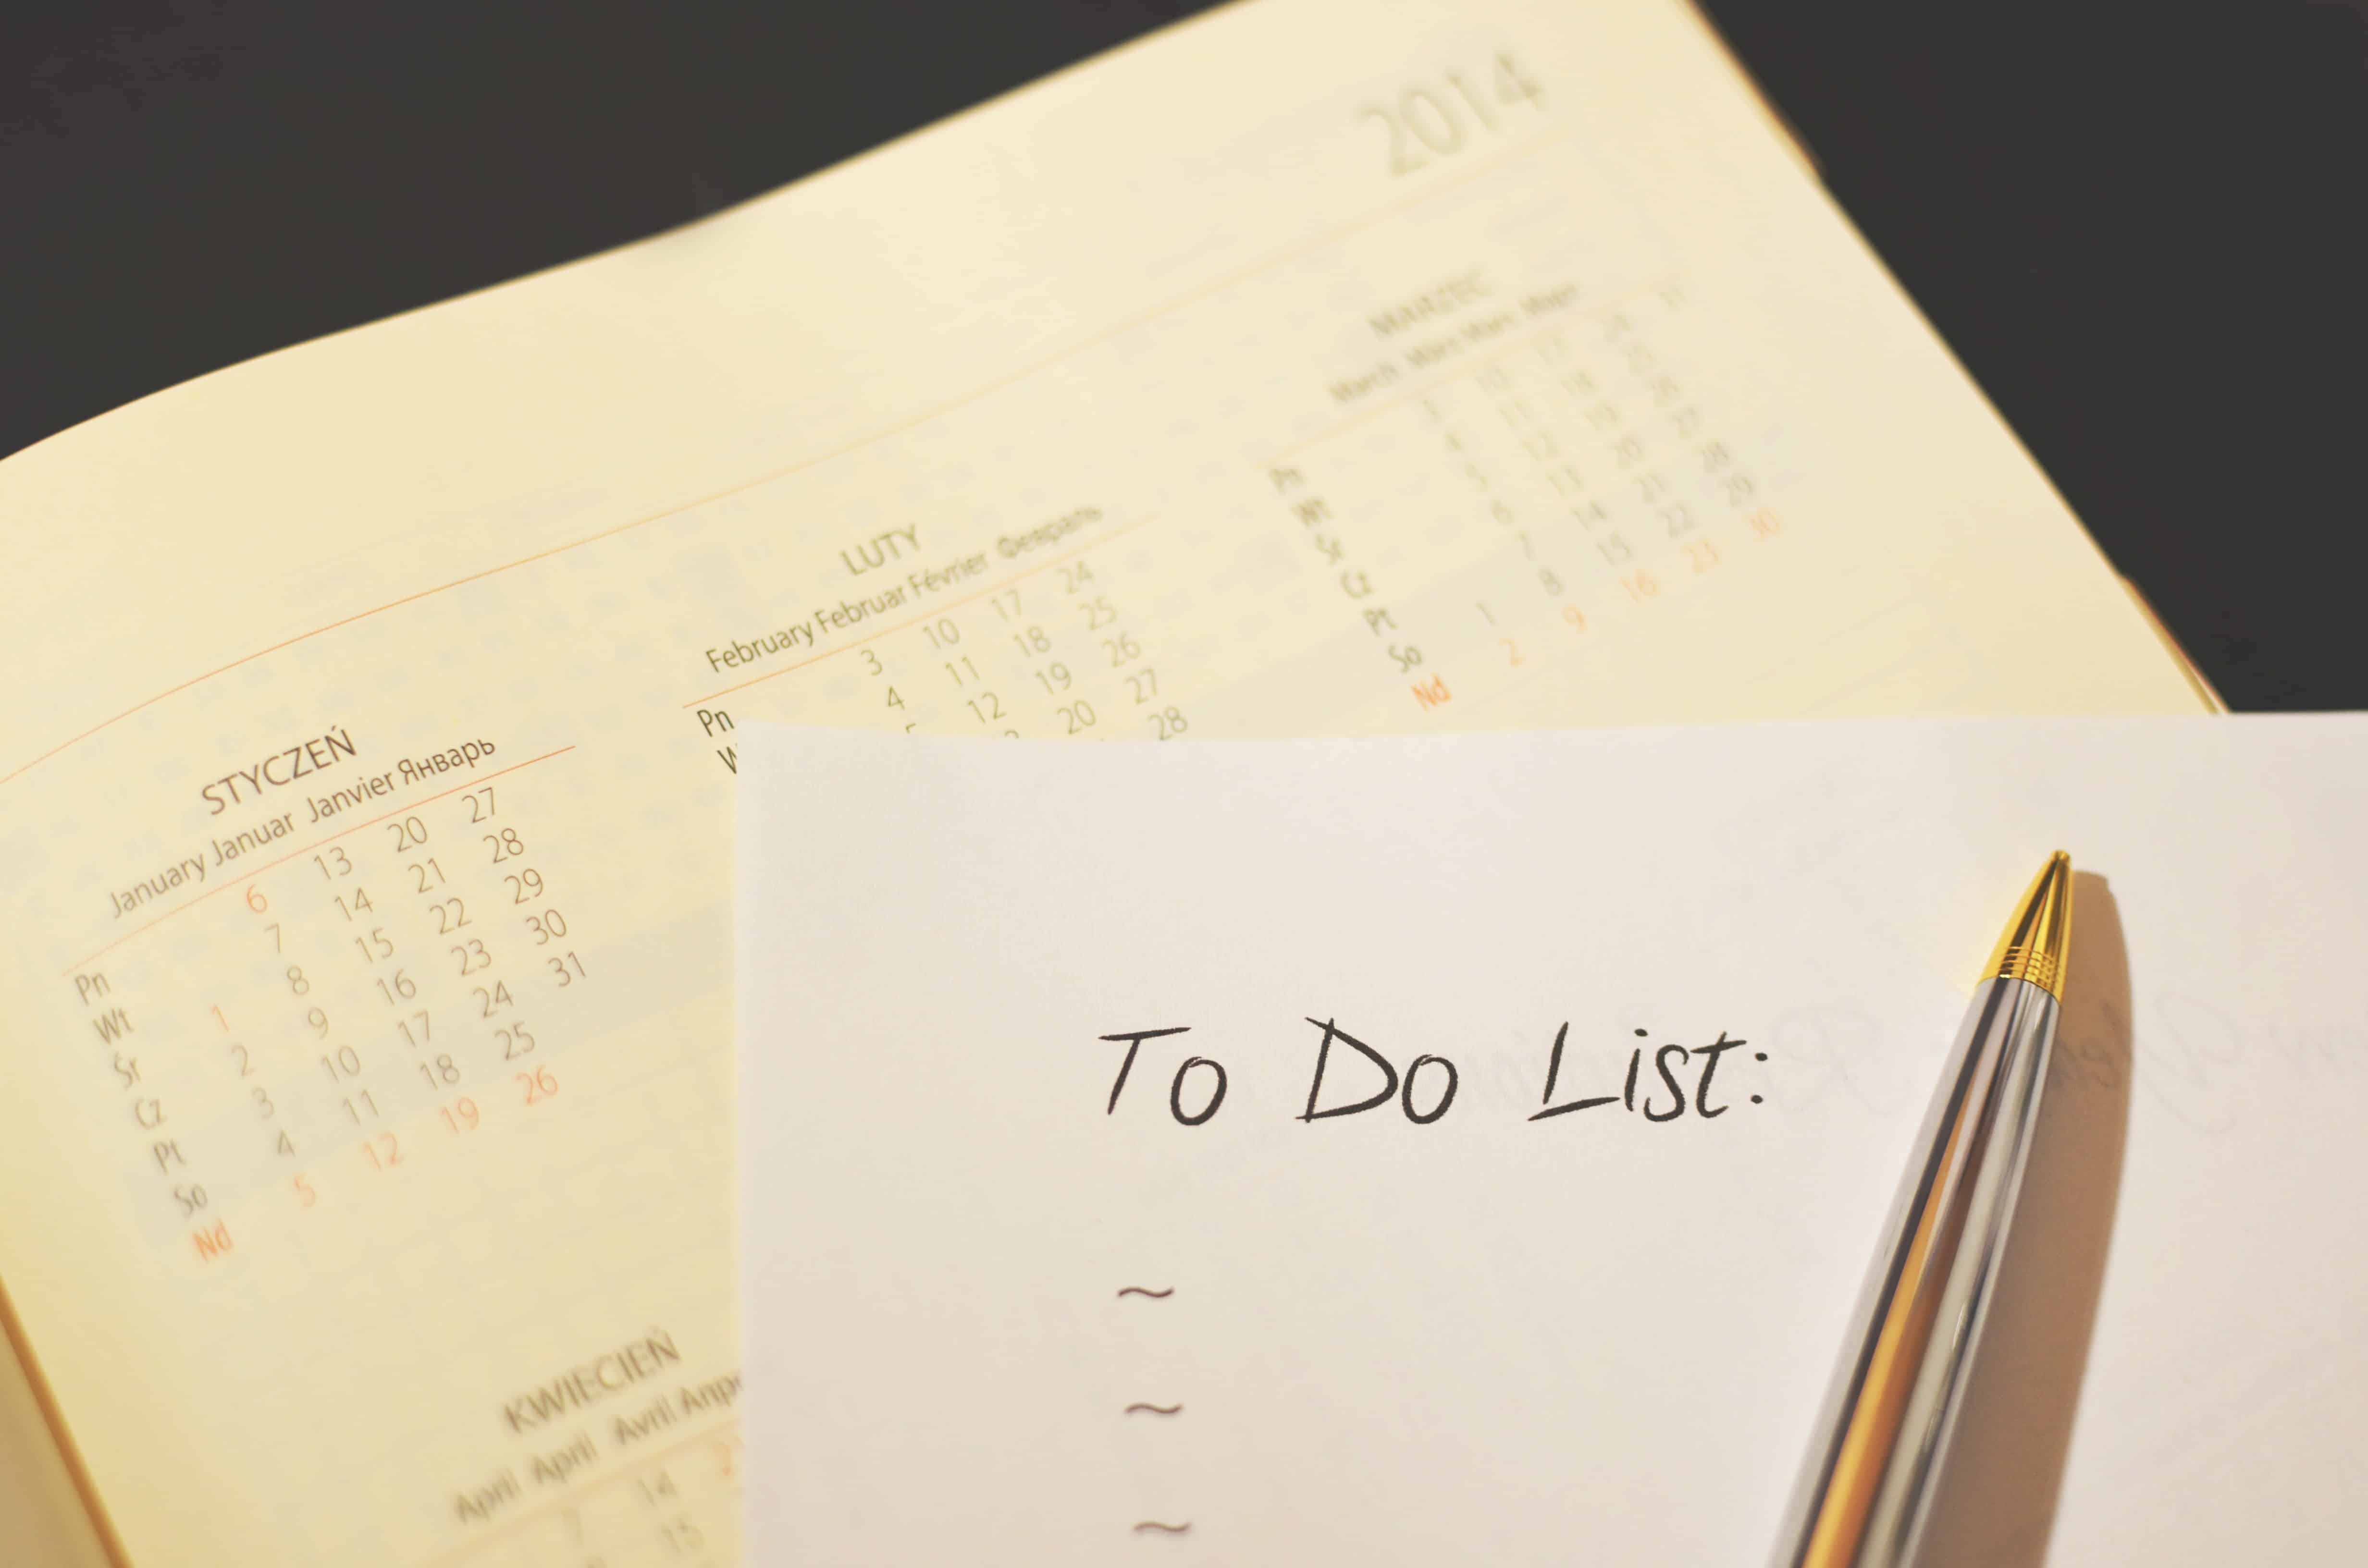 To Do List: Staying Organized productivity Organizing Your Daily Life: Daily Disciplines and Good Habits pen calendar to do checklist